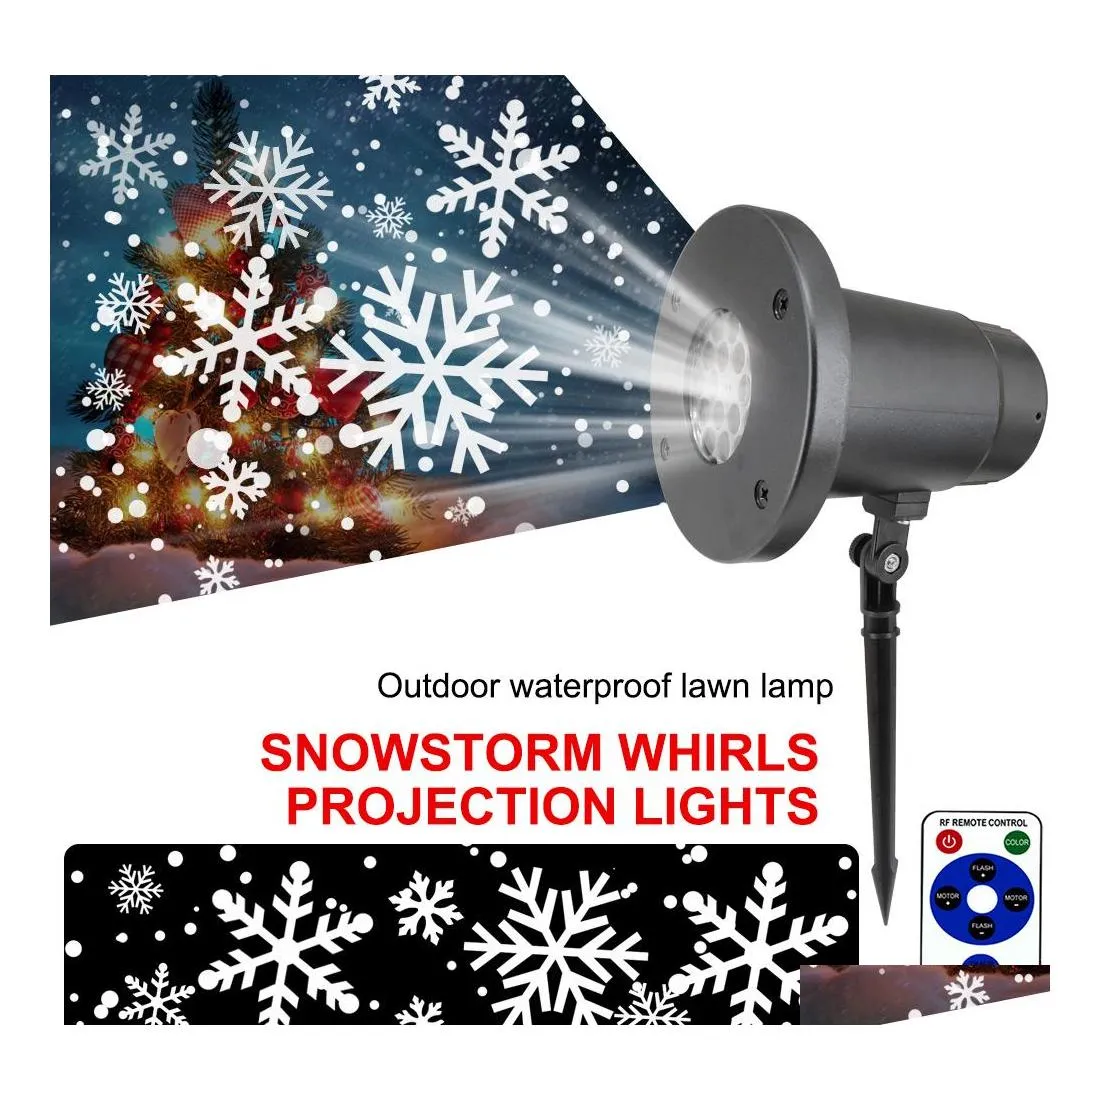 Led Effects Snowfall Snowflake Projector Laser Light Led Christmas Lights Outdoor Waterproof For Home Holiday Party Garden Decoratio Dhmpr